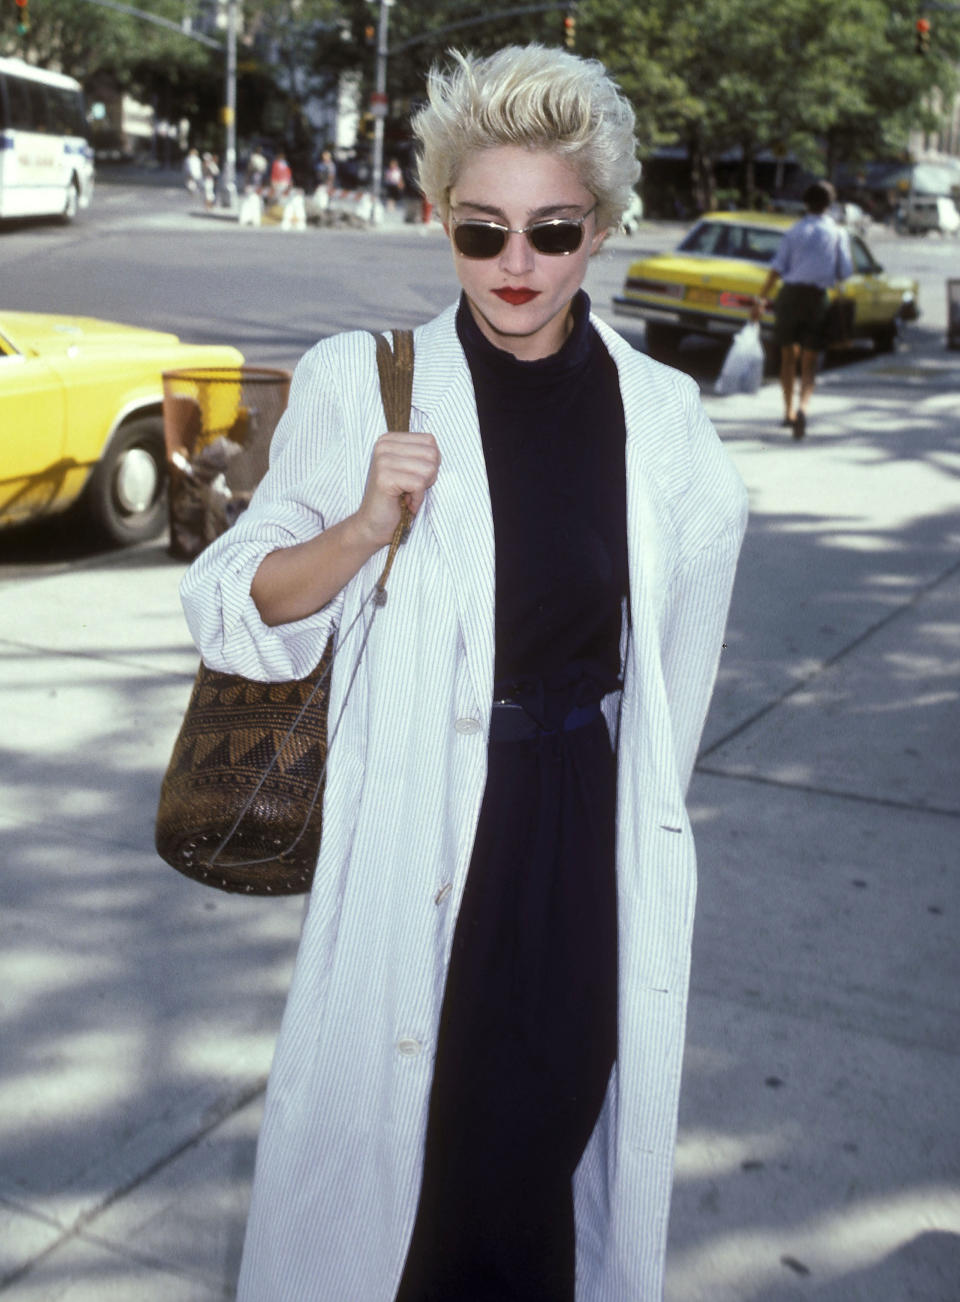 Arriving at a rehearsal for the Lincoln Center Workshop production of &ldquo;Goose and Tomtom&rdquo; in New York City, Madonna looked undeniably cool in this white seersucker overcoat&nbsp;and black ensemble.